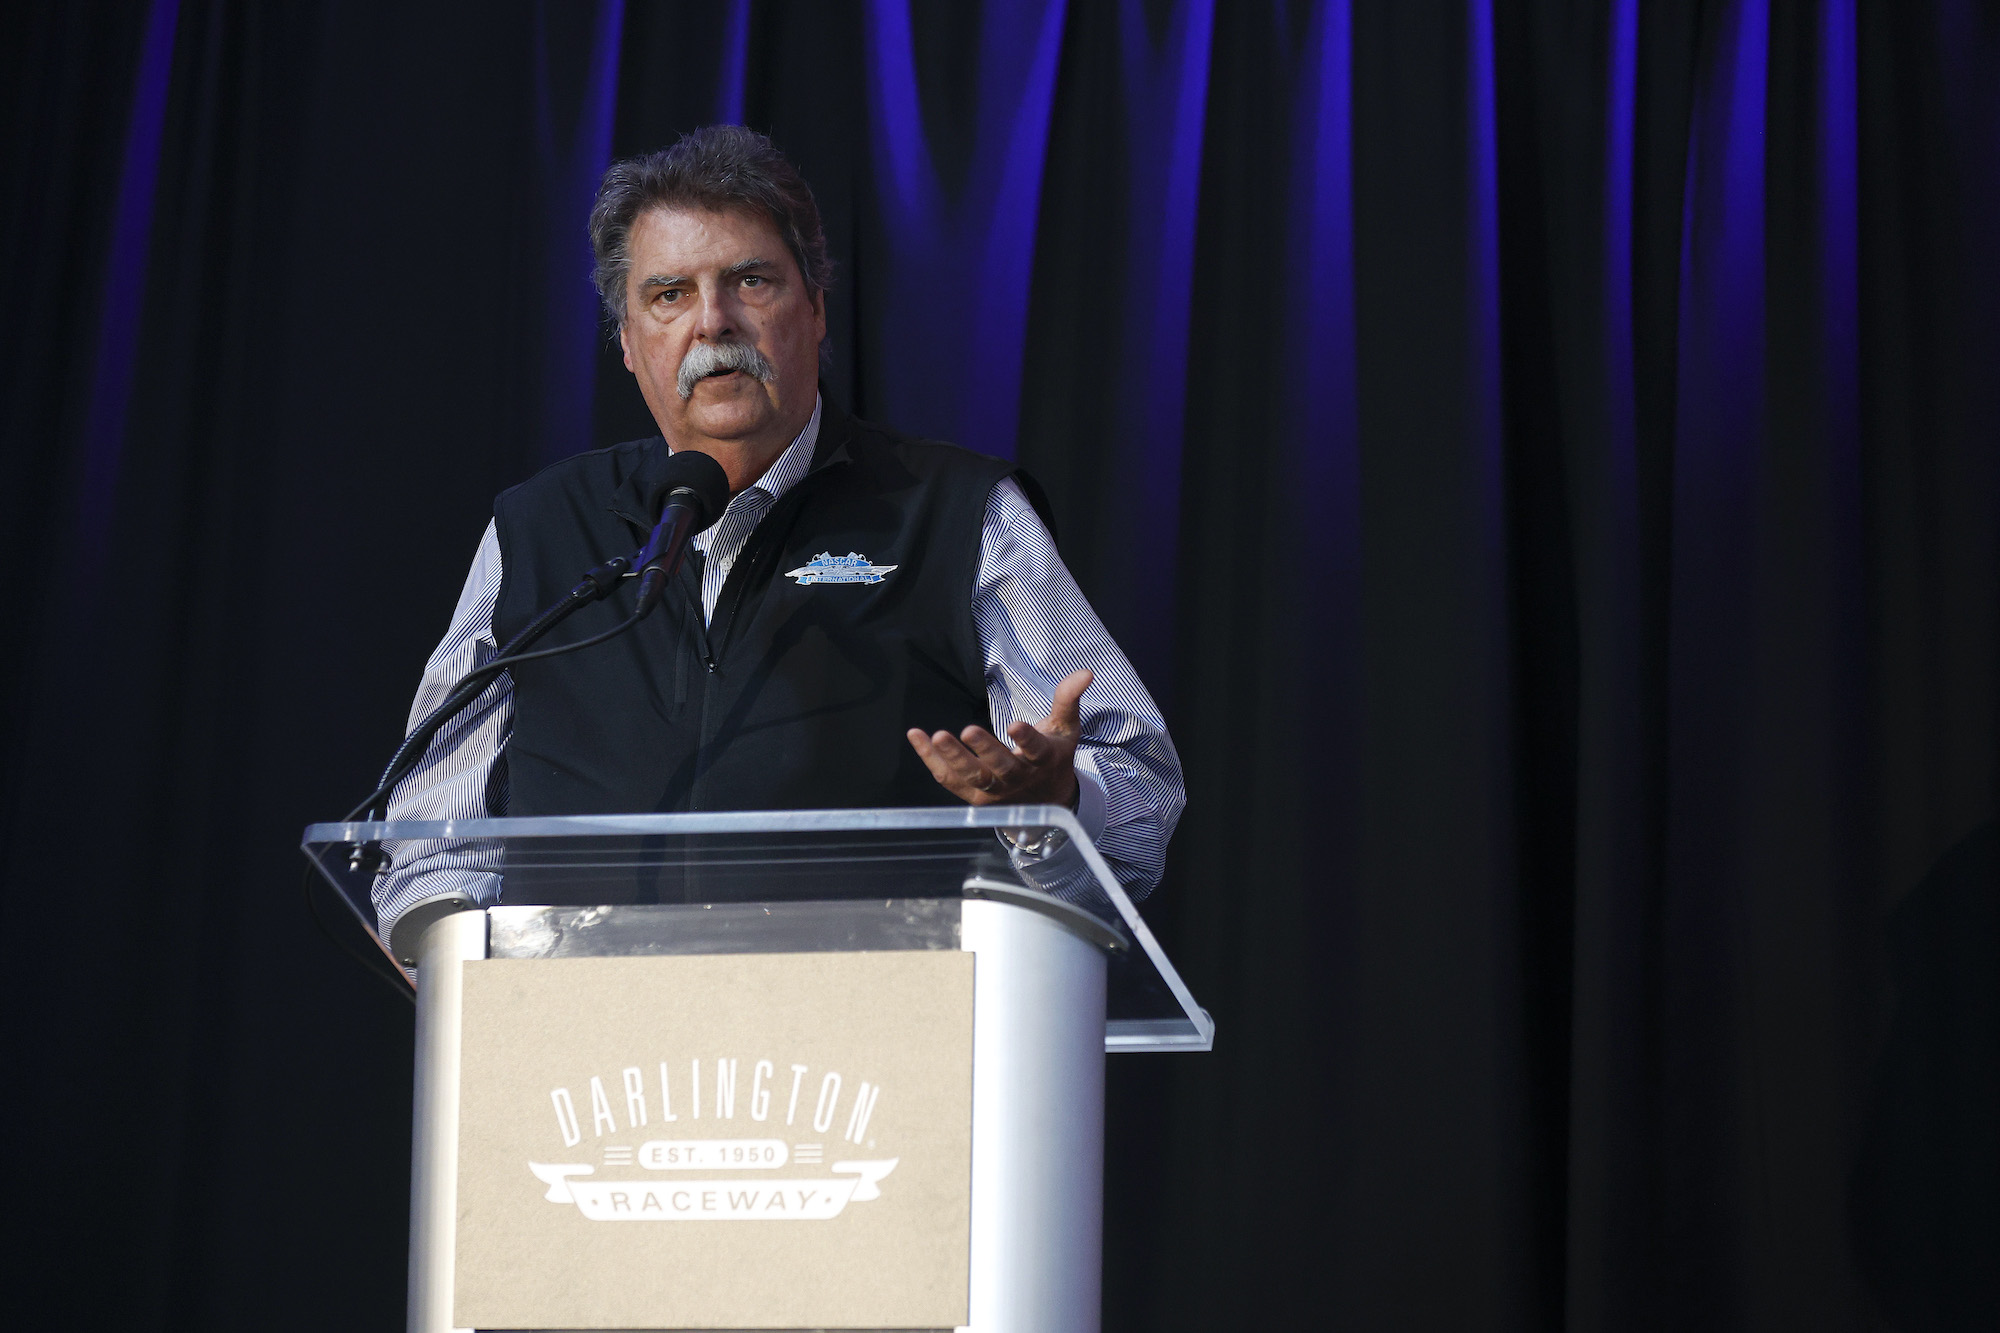 Mike Helton Intimidated Drivers, but Darrell Waltrip Once Ended ‘Ass-Chewing’ with Angry NASCAR Leader in an Abrupt and Unexpected Way